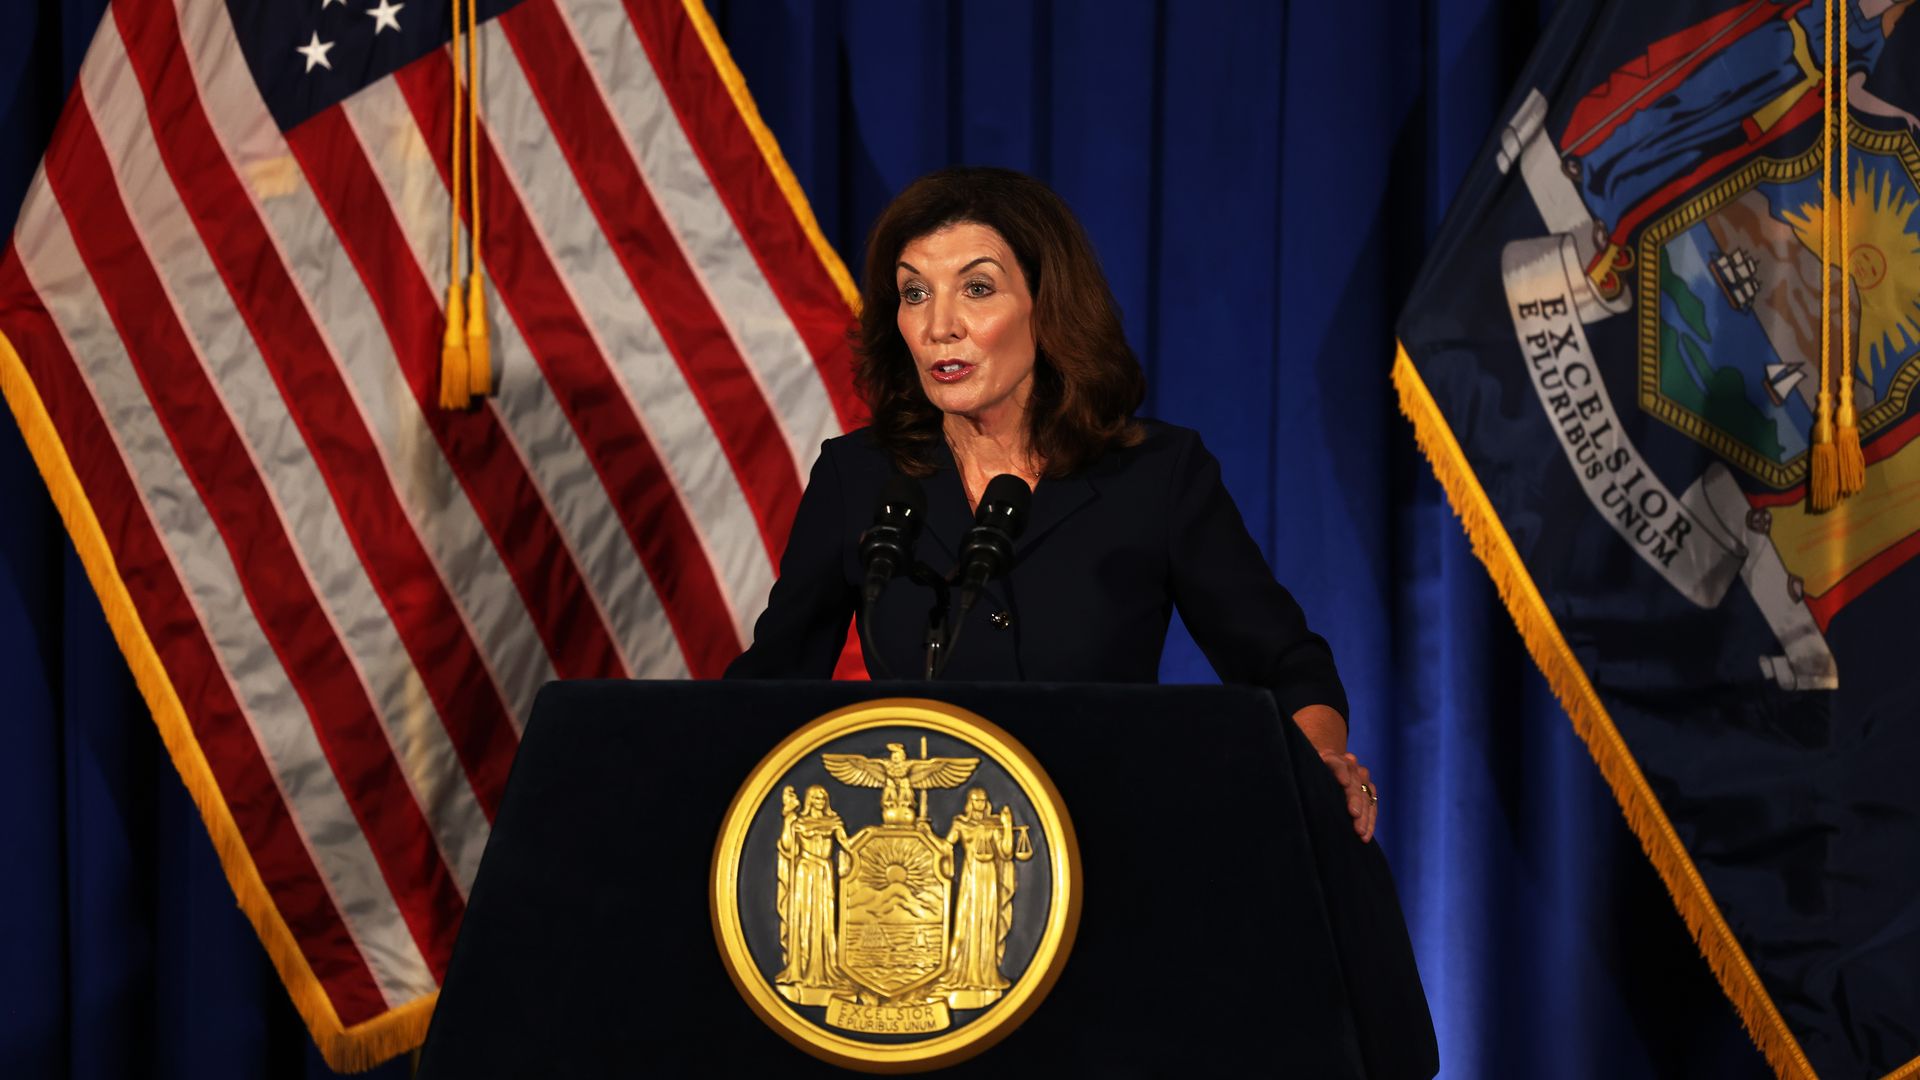 New York Gov. Kathy Hochul speaking during a press conference at the New York State Capitol.